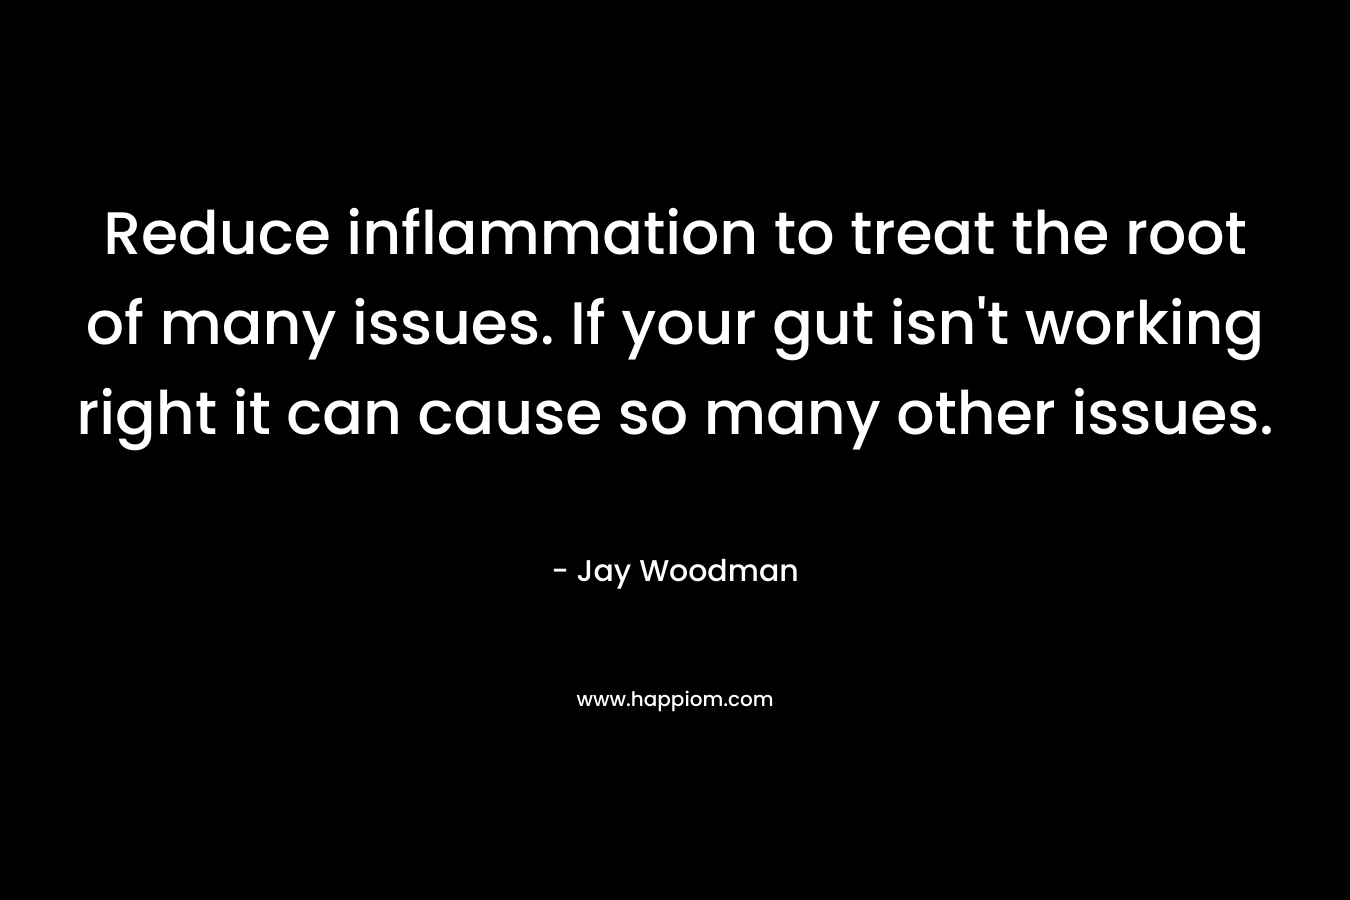 Reduce inflammation to treat the root of many issues. If your gut isn’t working right it can cause so many other issues. – Jay Woodman